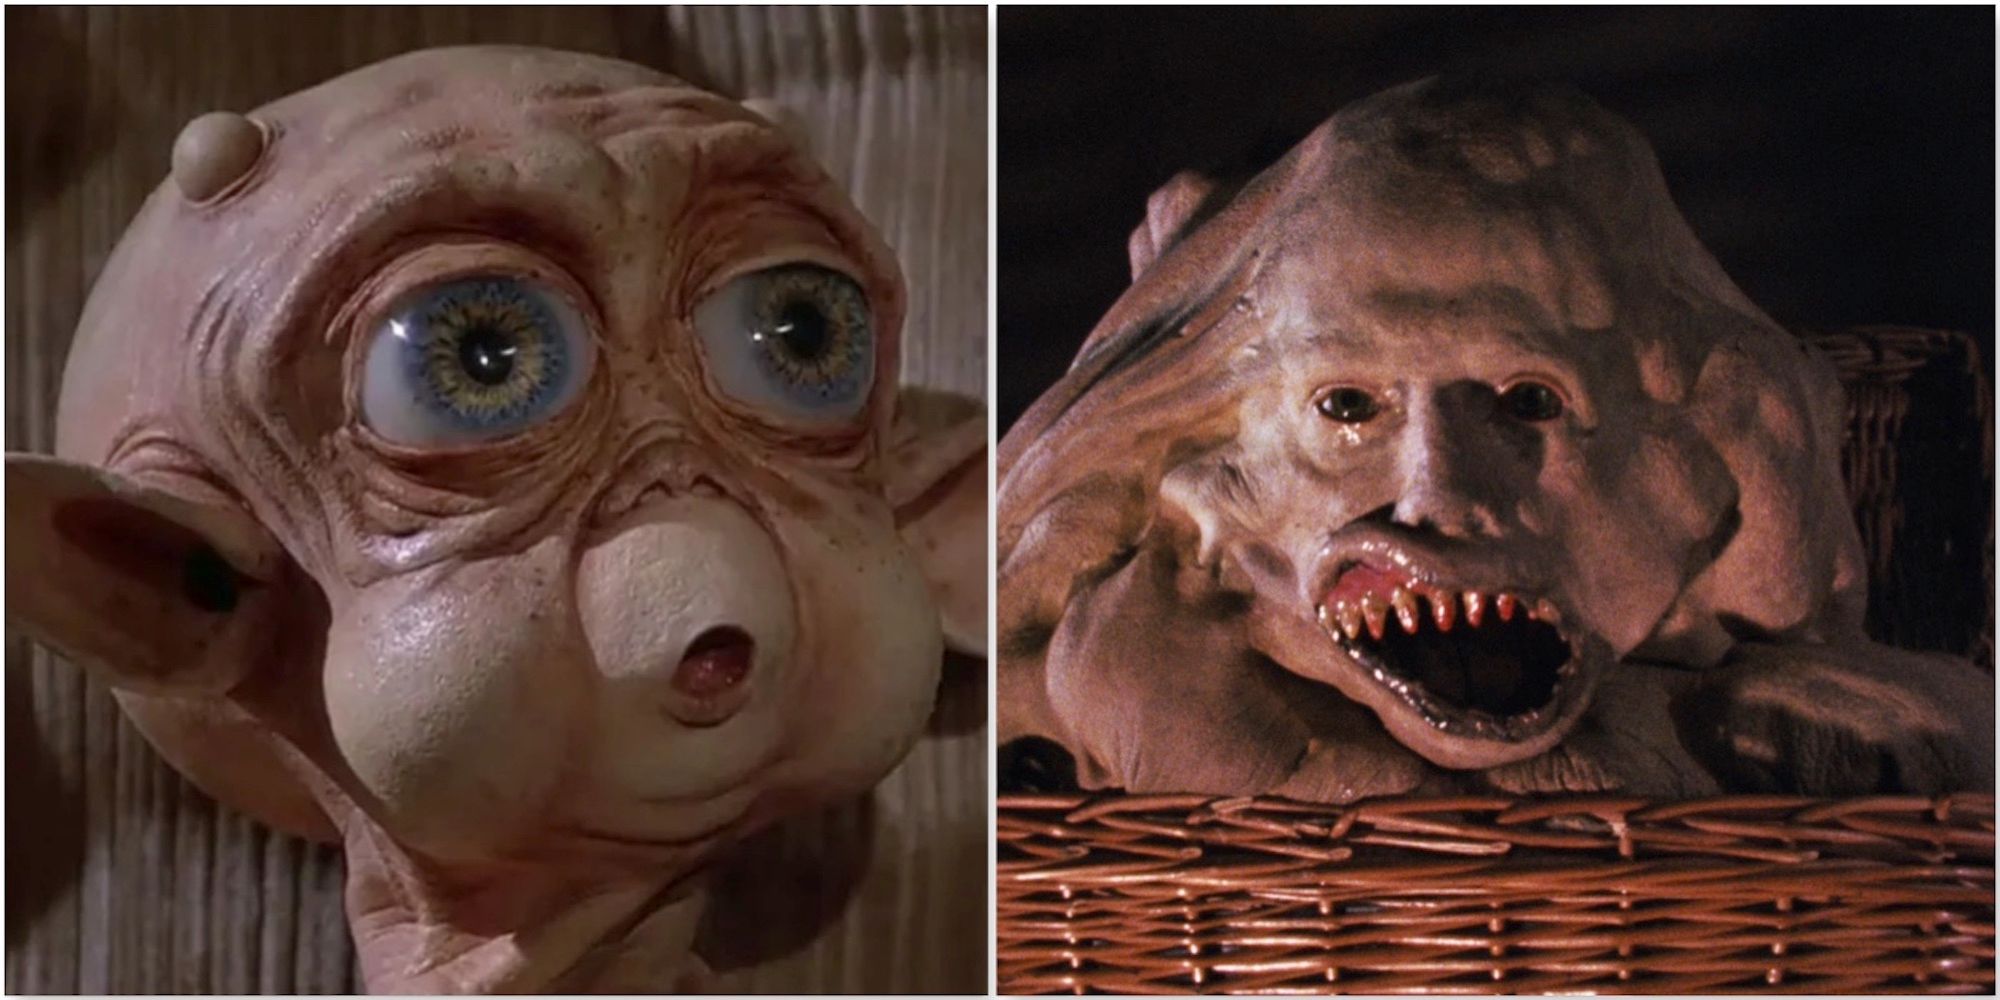 Mac from Mac And Me and Belial from Basket Case